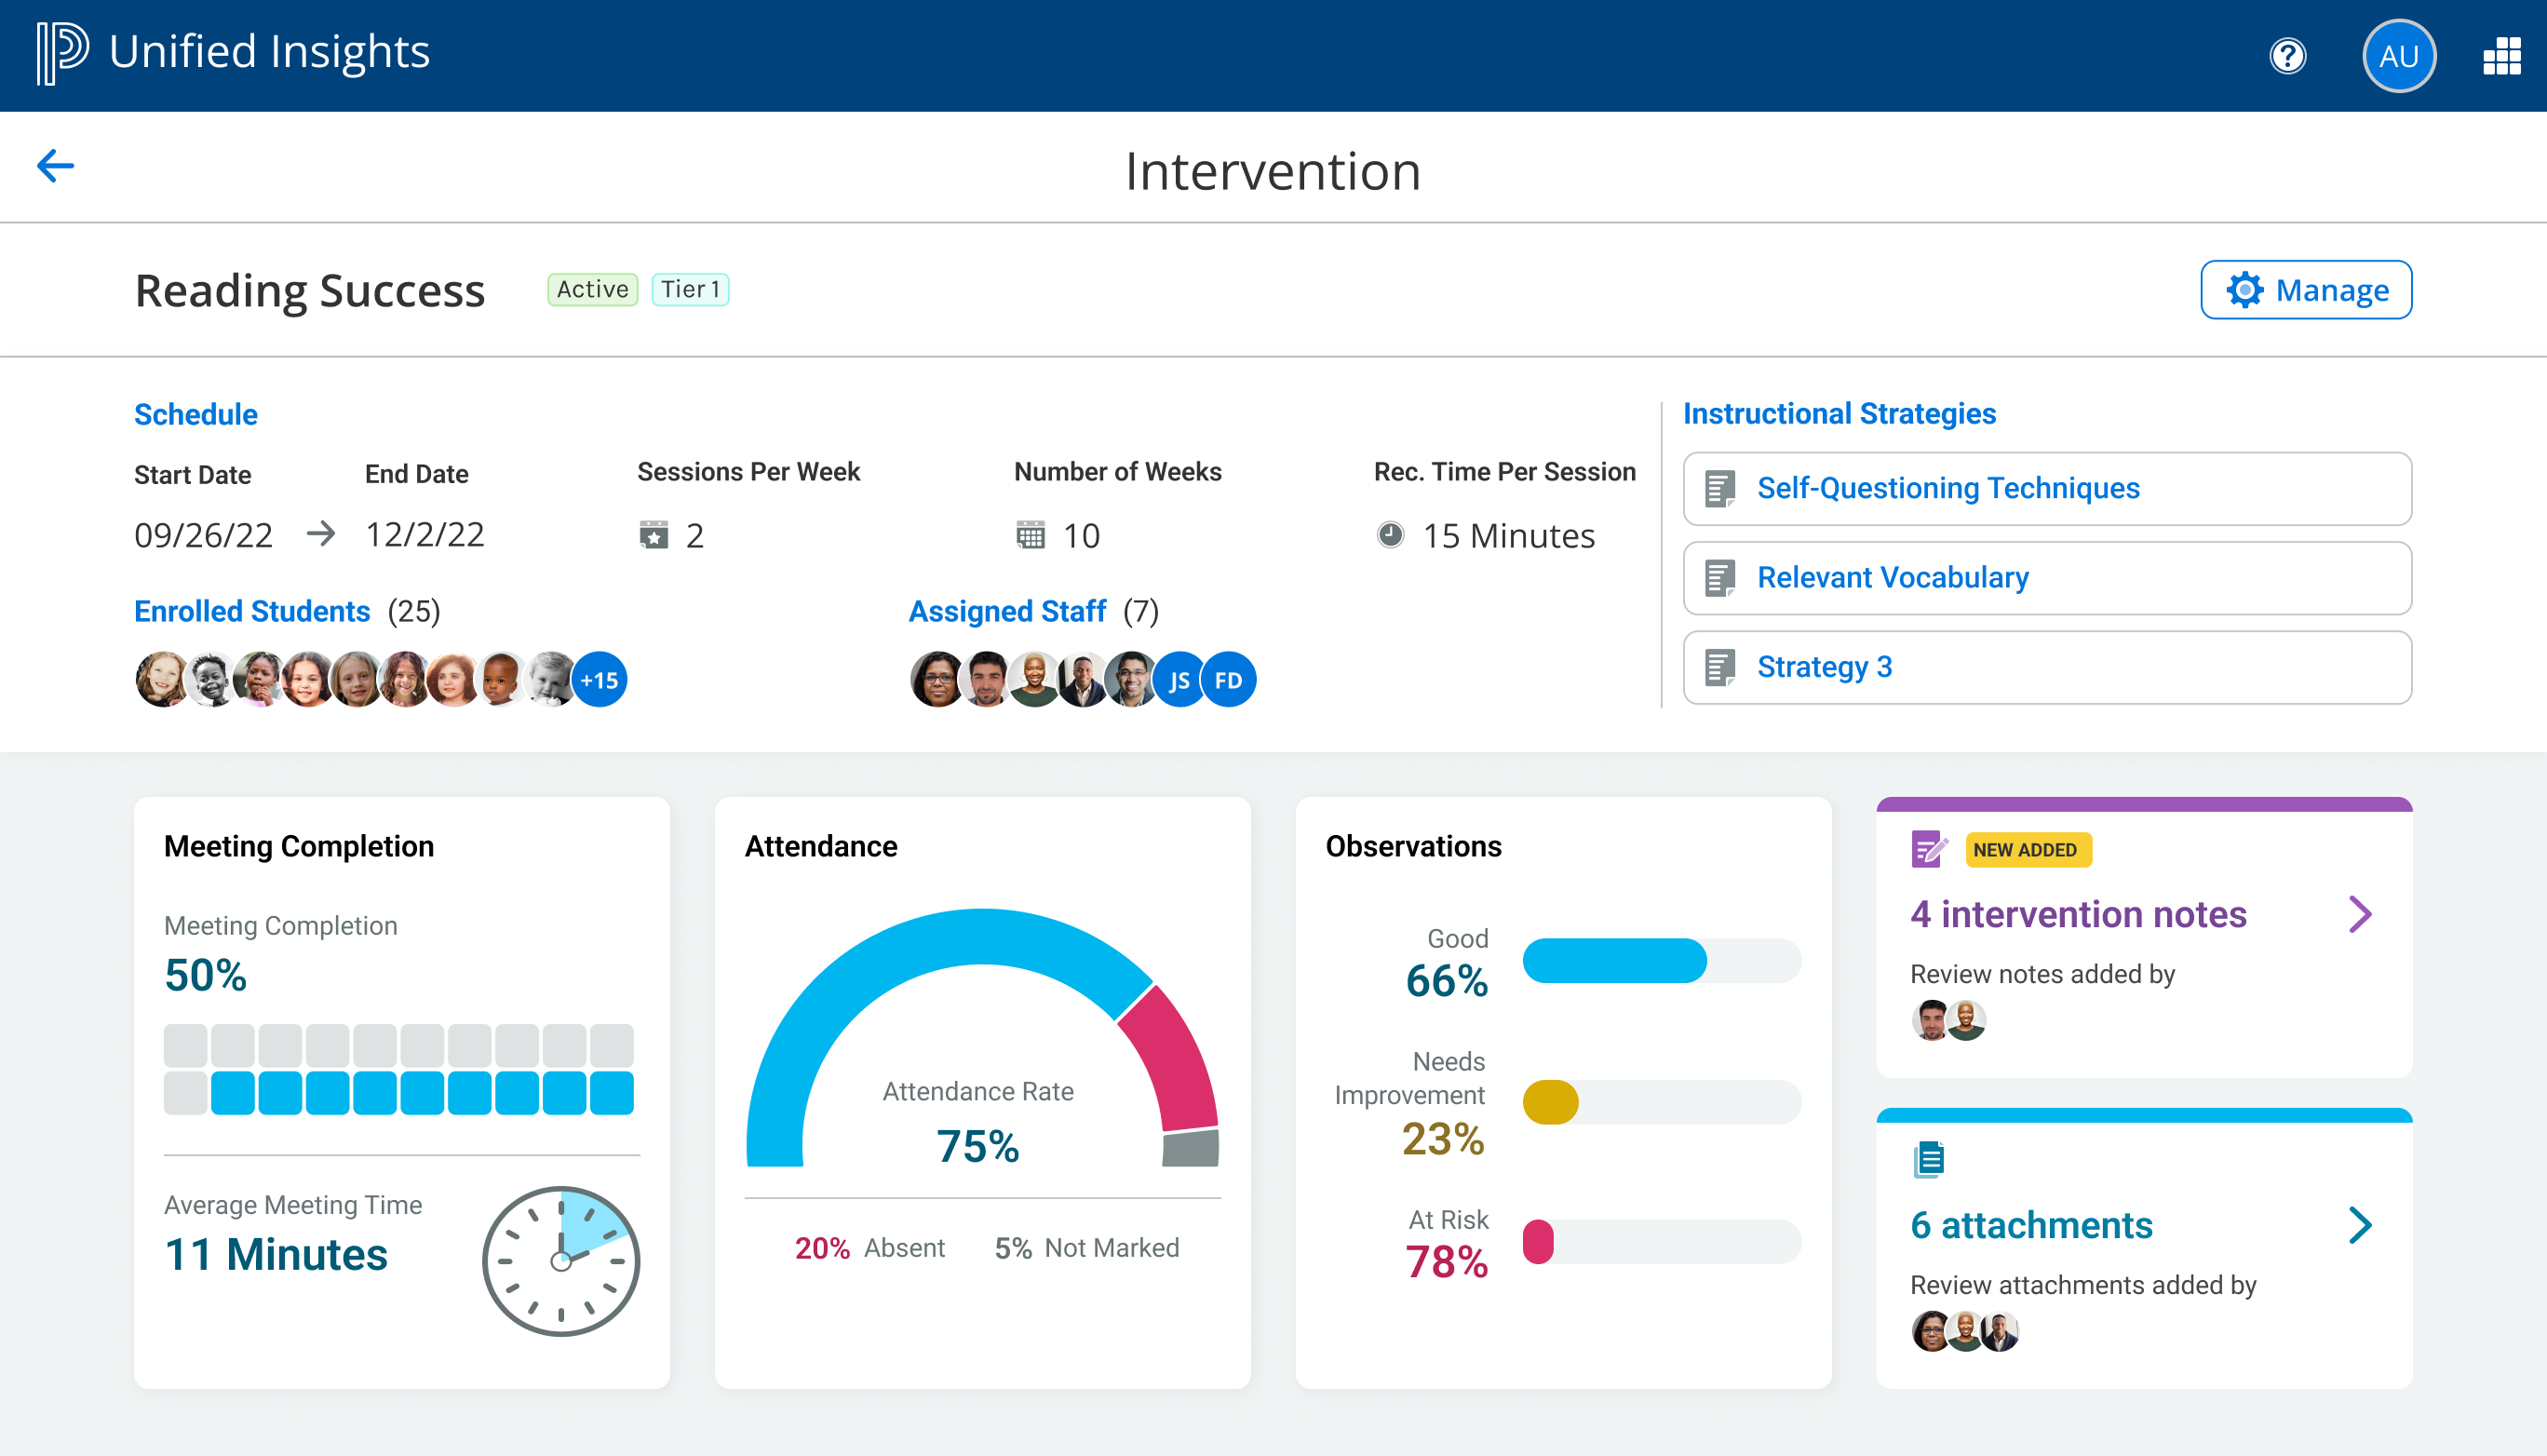 Unified Insights MTSS provides educators and intervention teams with one, secure platform to establish personalized student plans, identify at-risk students, assign and monitor interventions, and track progress toward goals.